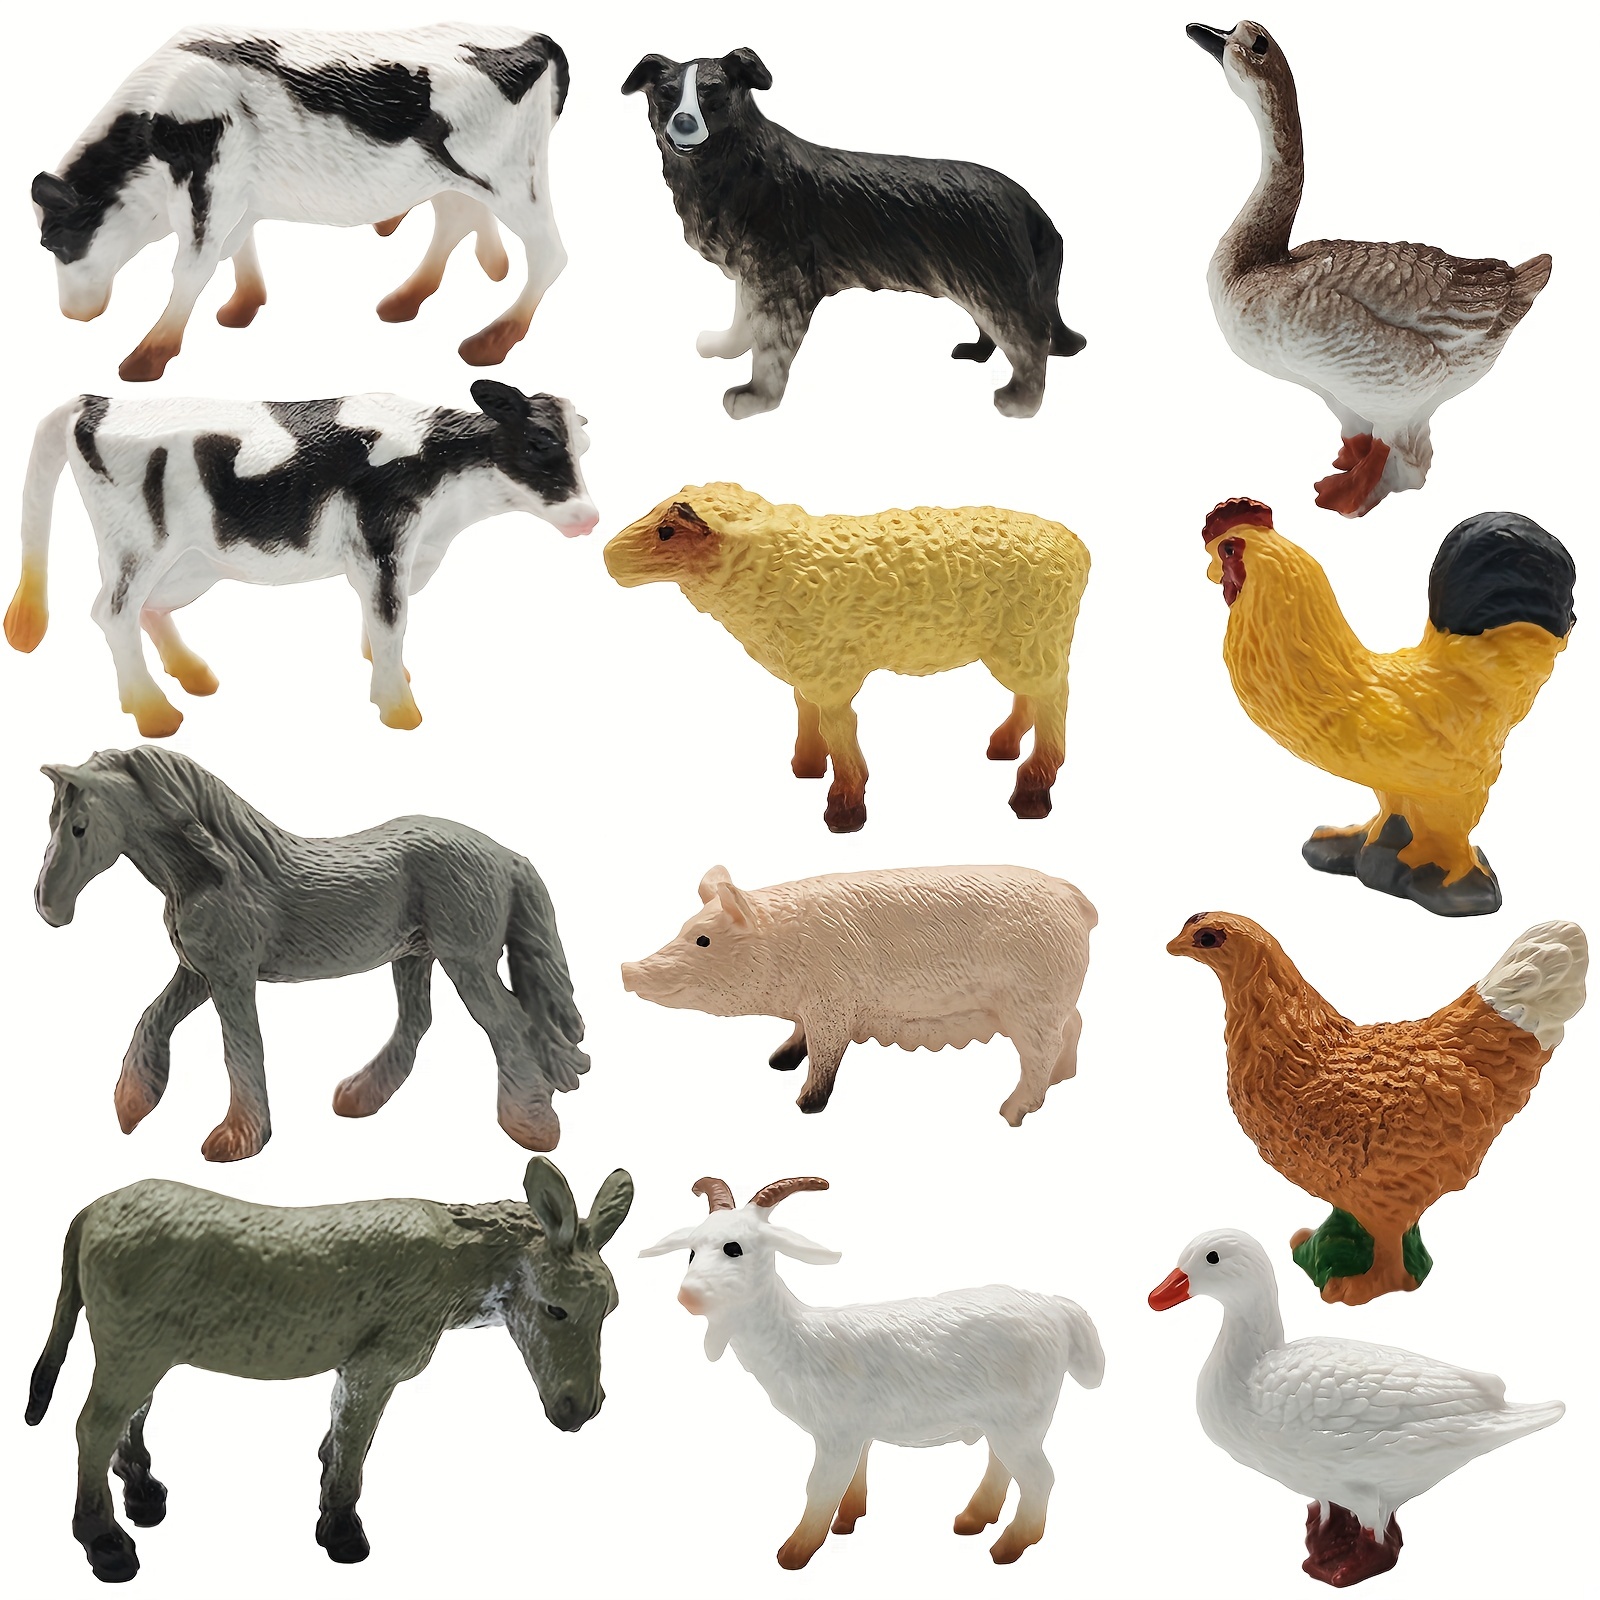  Cow Wooden Animal Toys for Toddler, Fun and Posable Wooden Farm  Toy, Wooden Toys, Wood Farm Animals, Early Education Boys and Girl,  Bendable Figures Farm Toys Set : Toys & Games